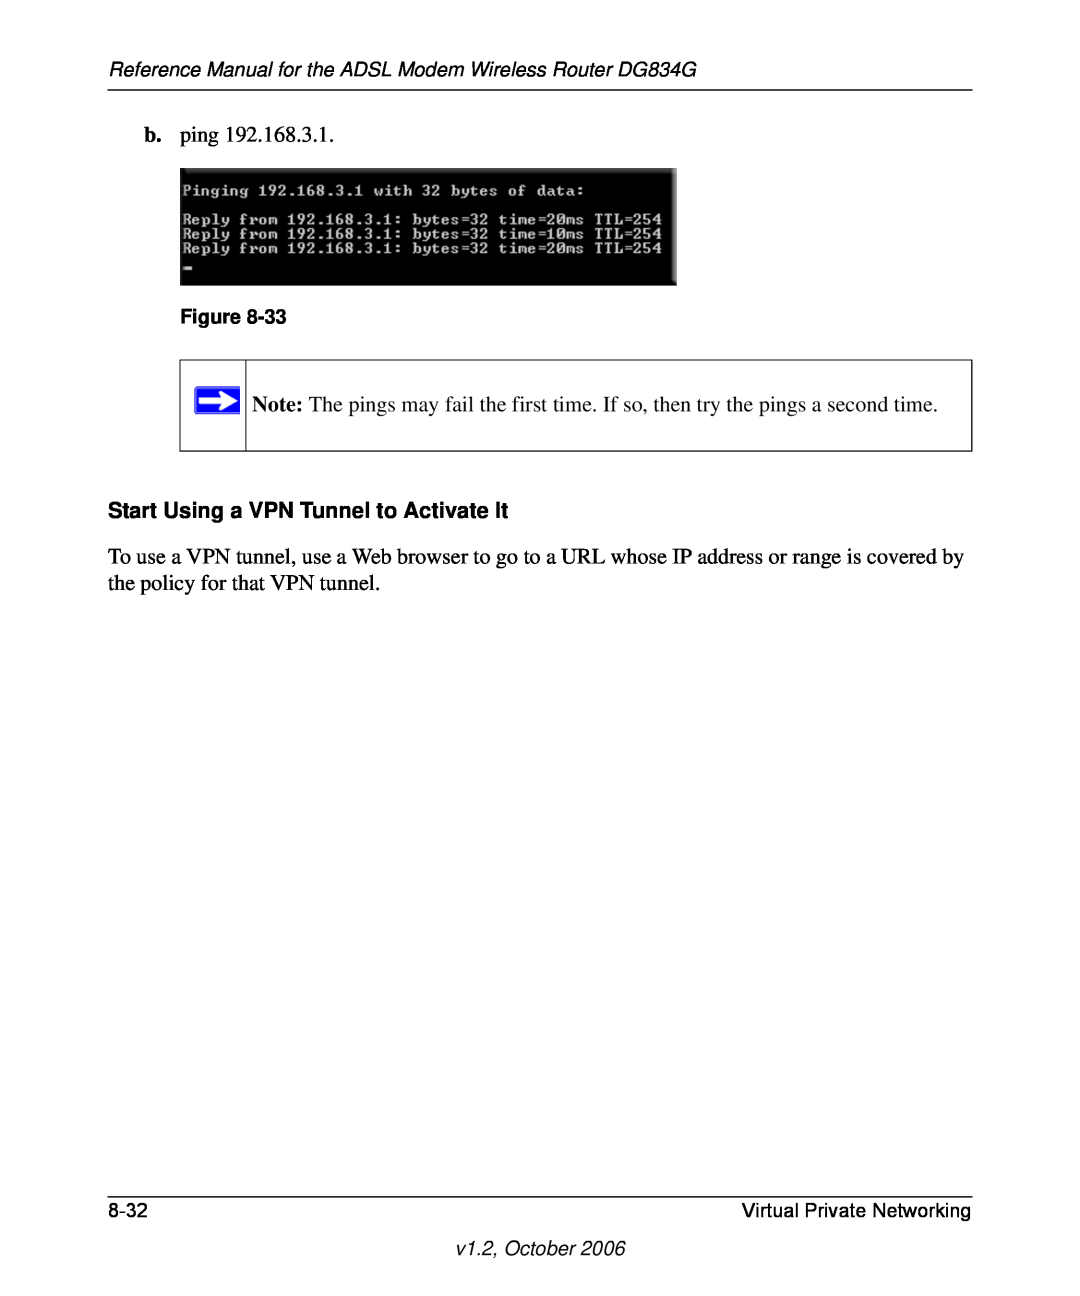 NETGEAR DG834G manual Start Using a VPN Tunnel to Activate It 